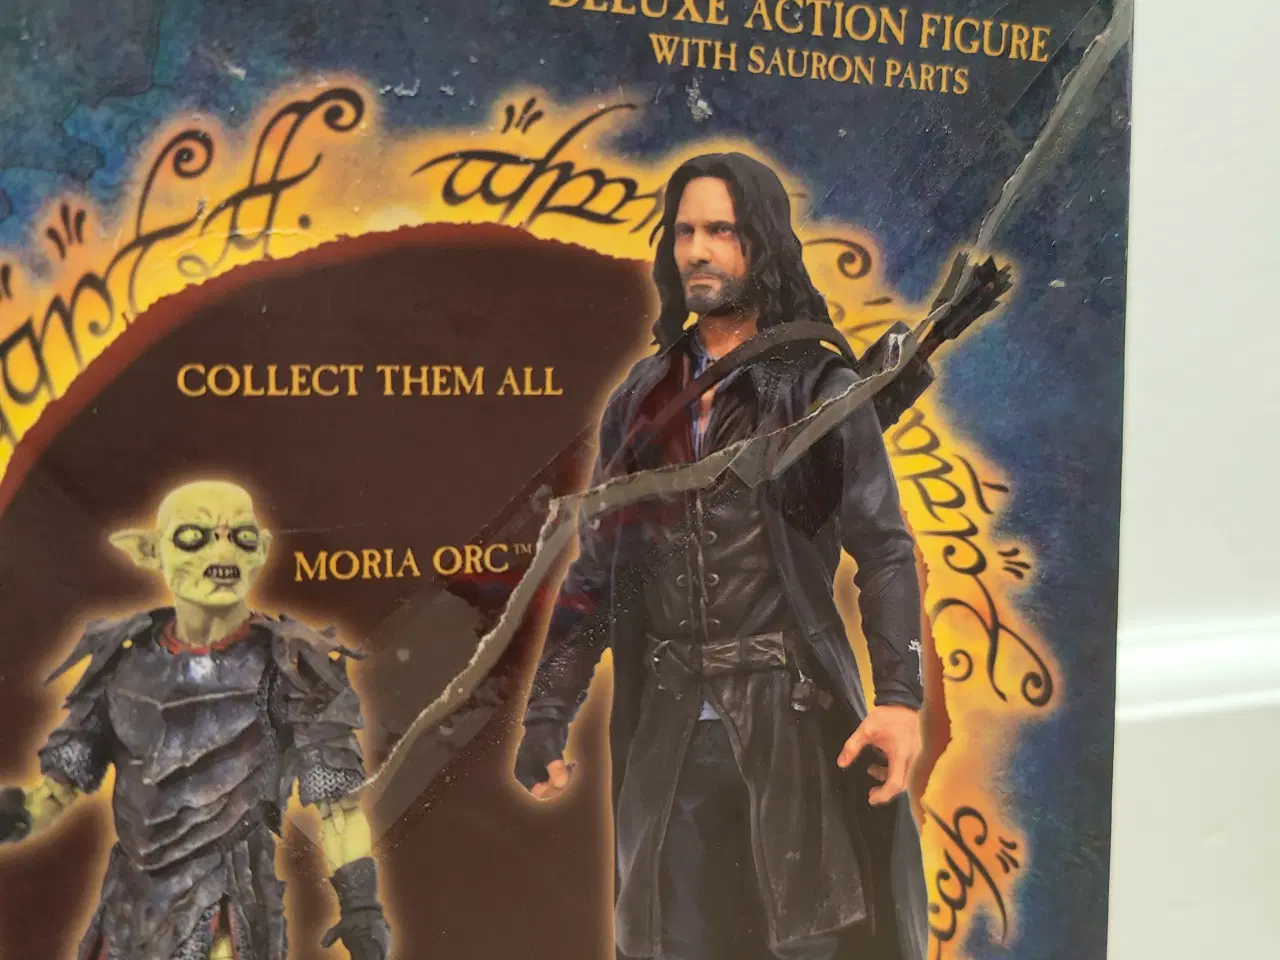 Billede 4 - The Lord of the Rings Aragorn figur